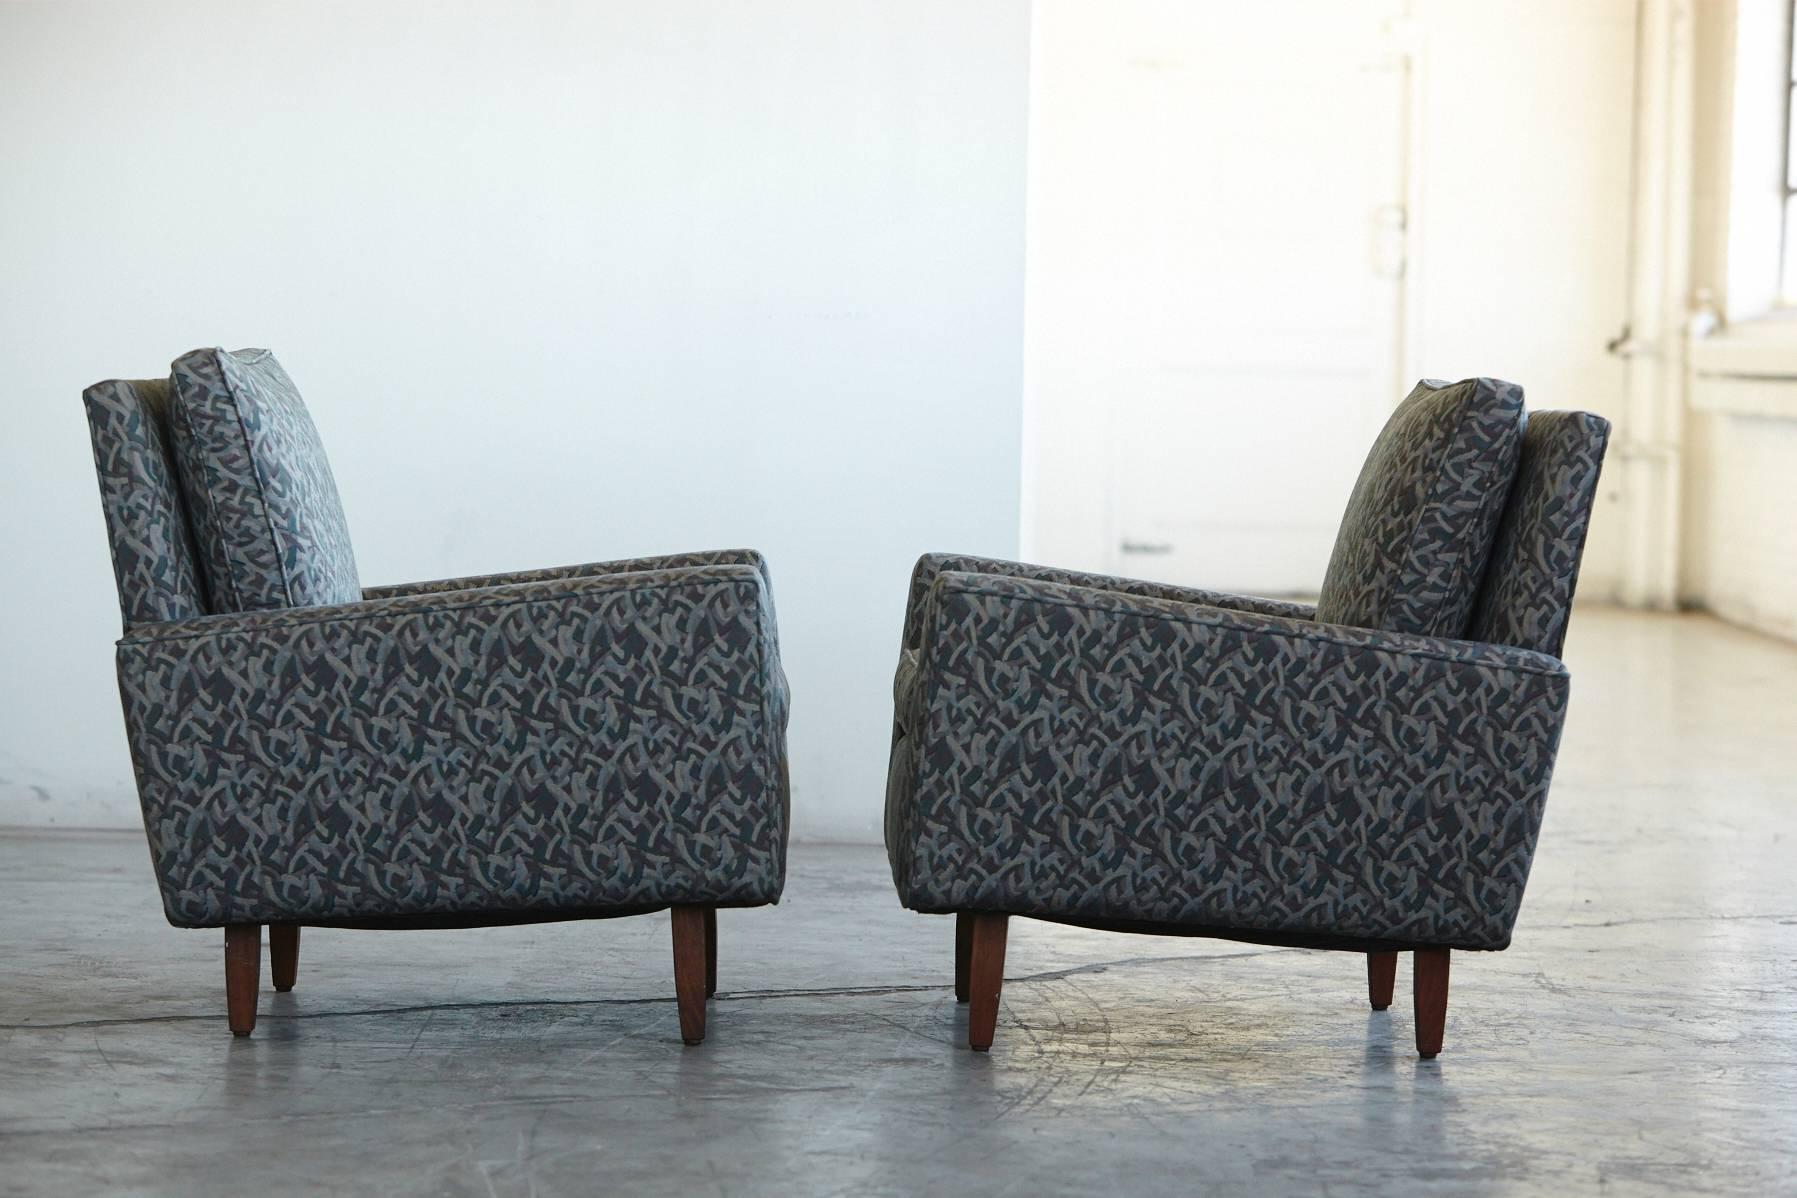 American Pair of Early Florence Knoll Lounge Chairs from 1967, Reupholstered in the 1980s